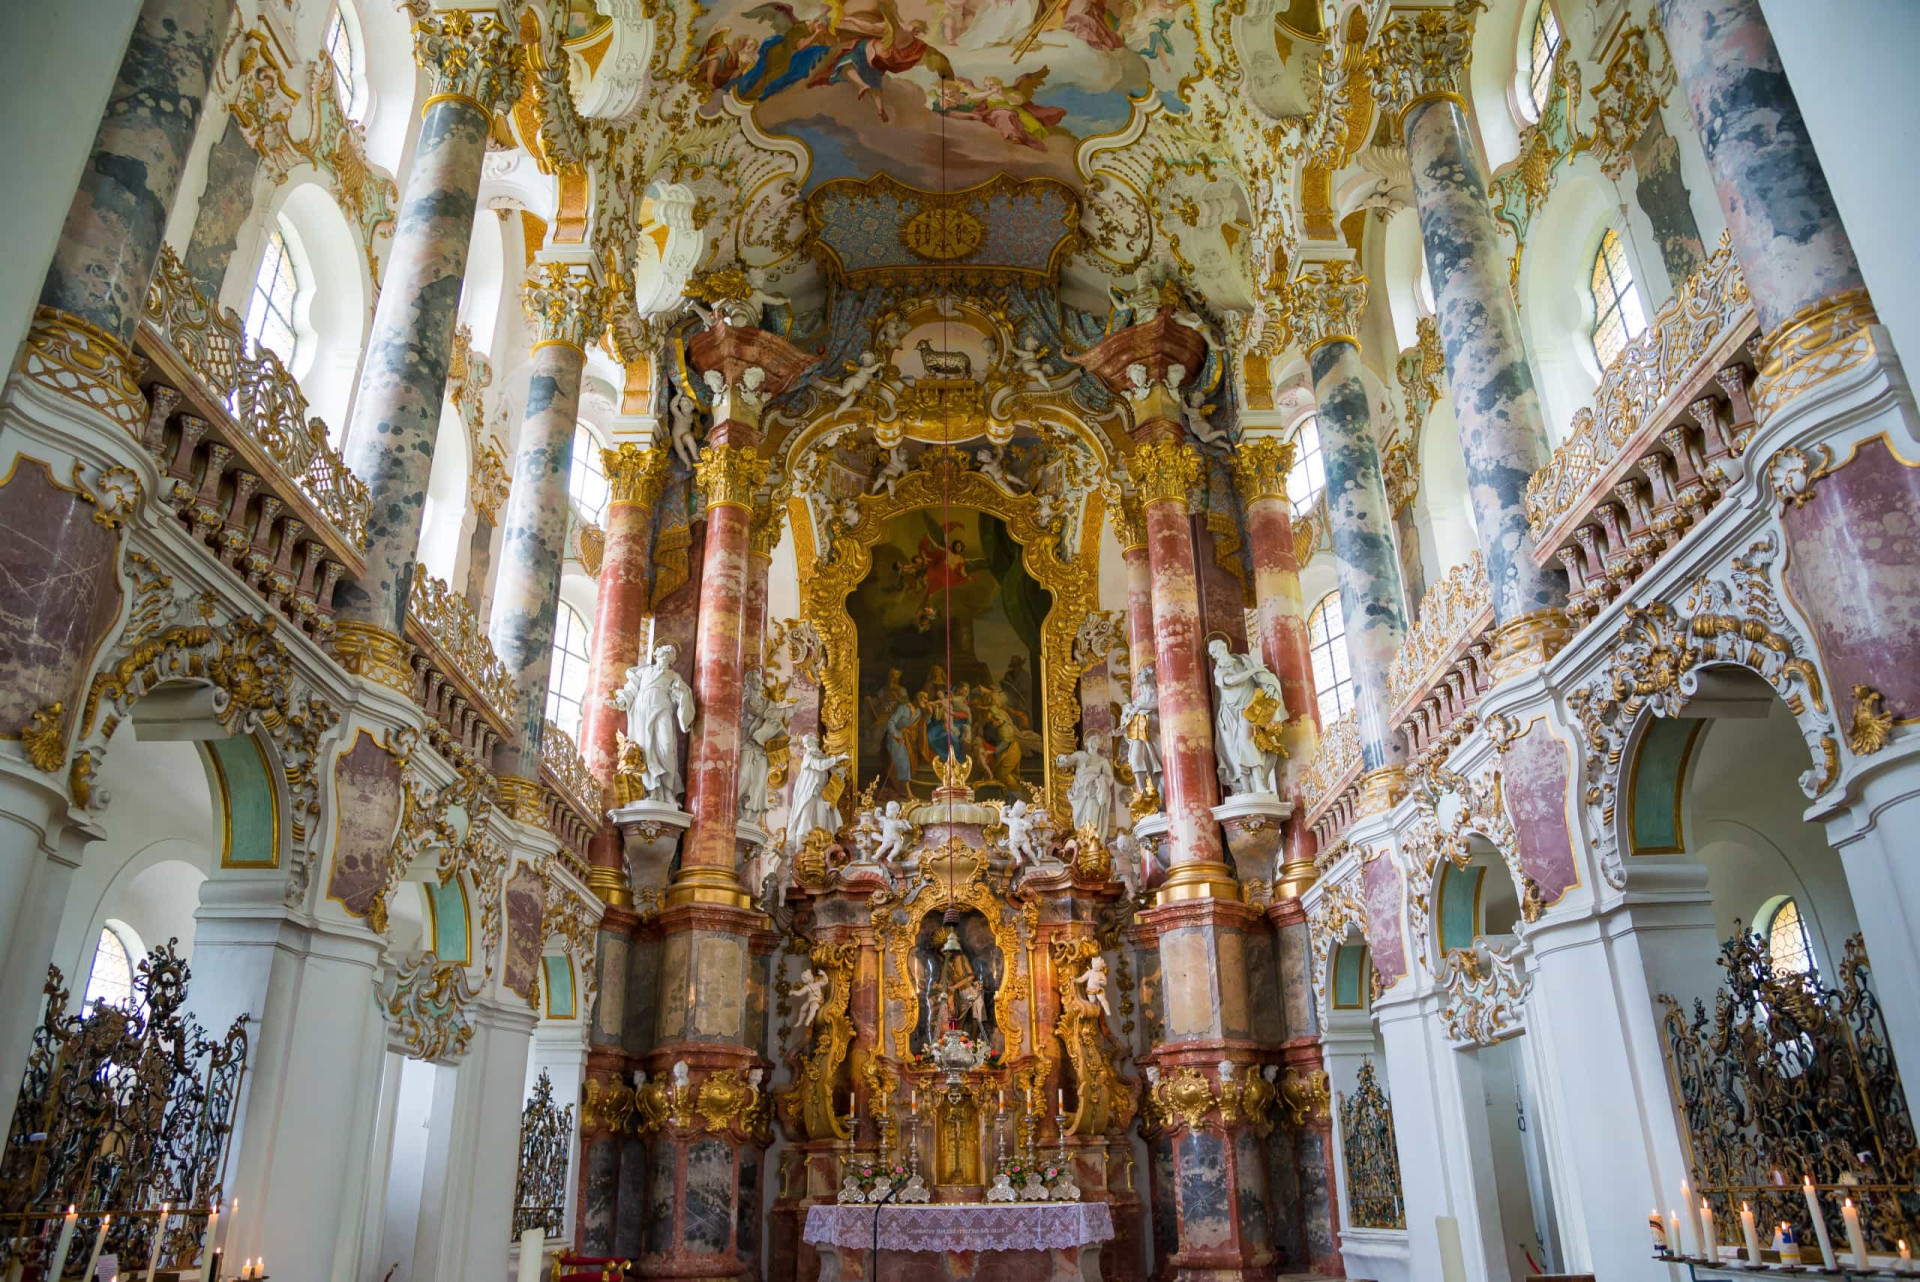 <p>Steingaden's Pilgrimage Church of Wies is deserving of its UNESCO World Heritage status. A masterpiece of Bavarian Rococo, its colorful and exuberant interior is simply a joy to behold.</p><p>You may also like:<a href="https://www.starsinsider.com/n/380446?utm_source=msn.com&utm_medium=display&utm_campaign=referral_description&utm_content=481885v1en-us"> Zendaya: Meet the girl taking over the world</a></p>